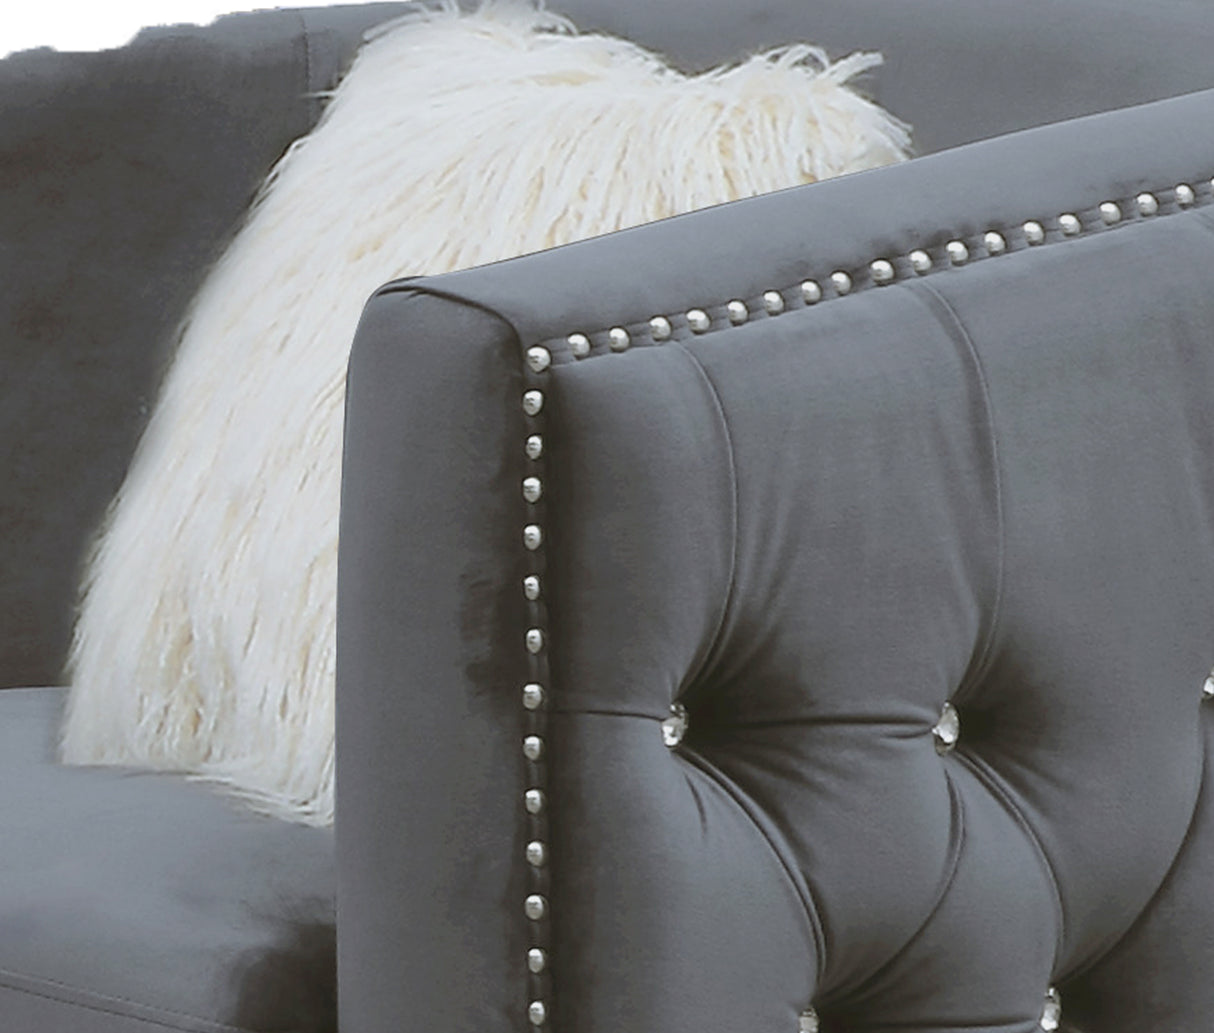 Afreen Button Tufted Chair Finished with Velvet Fabric Upholstery in Gray - Home Elegance USA